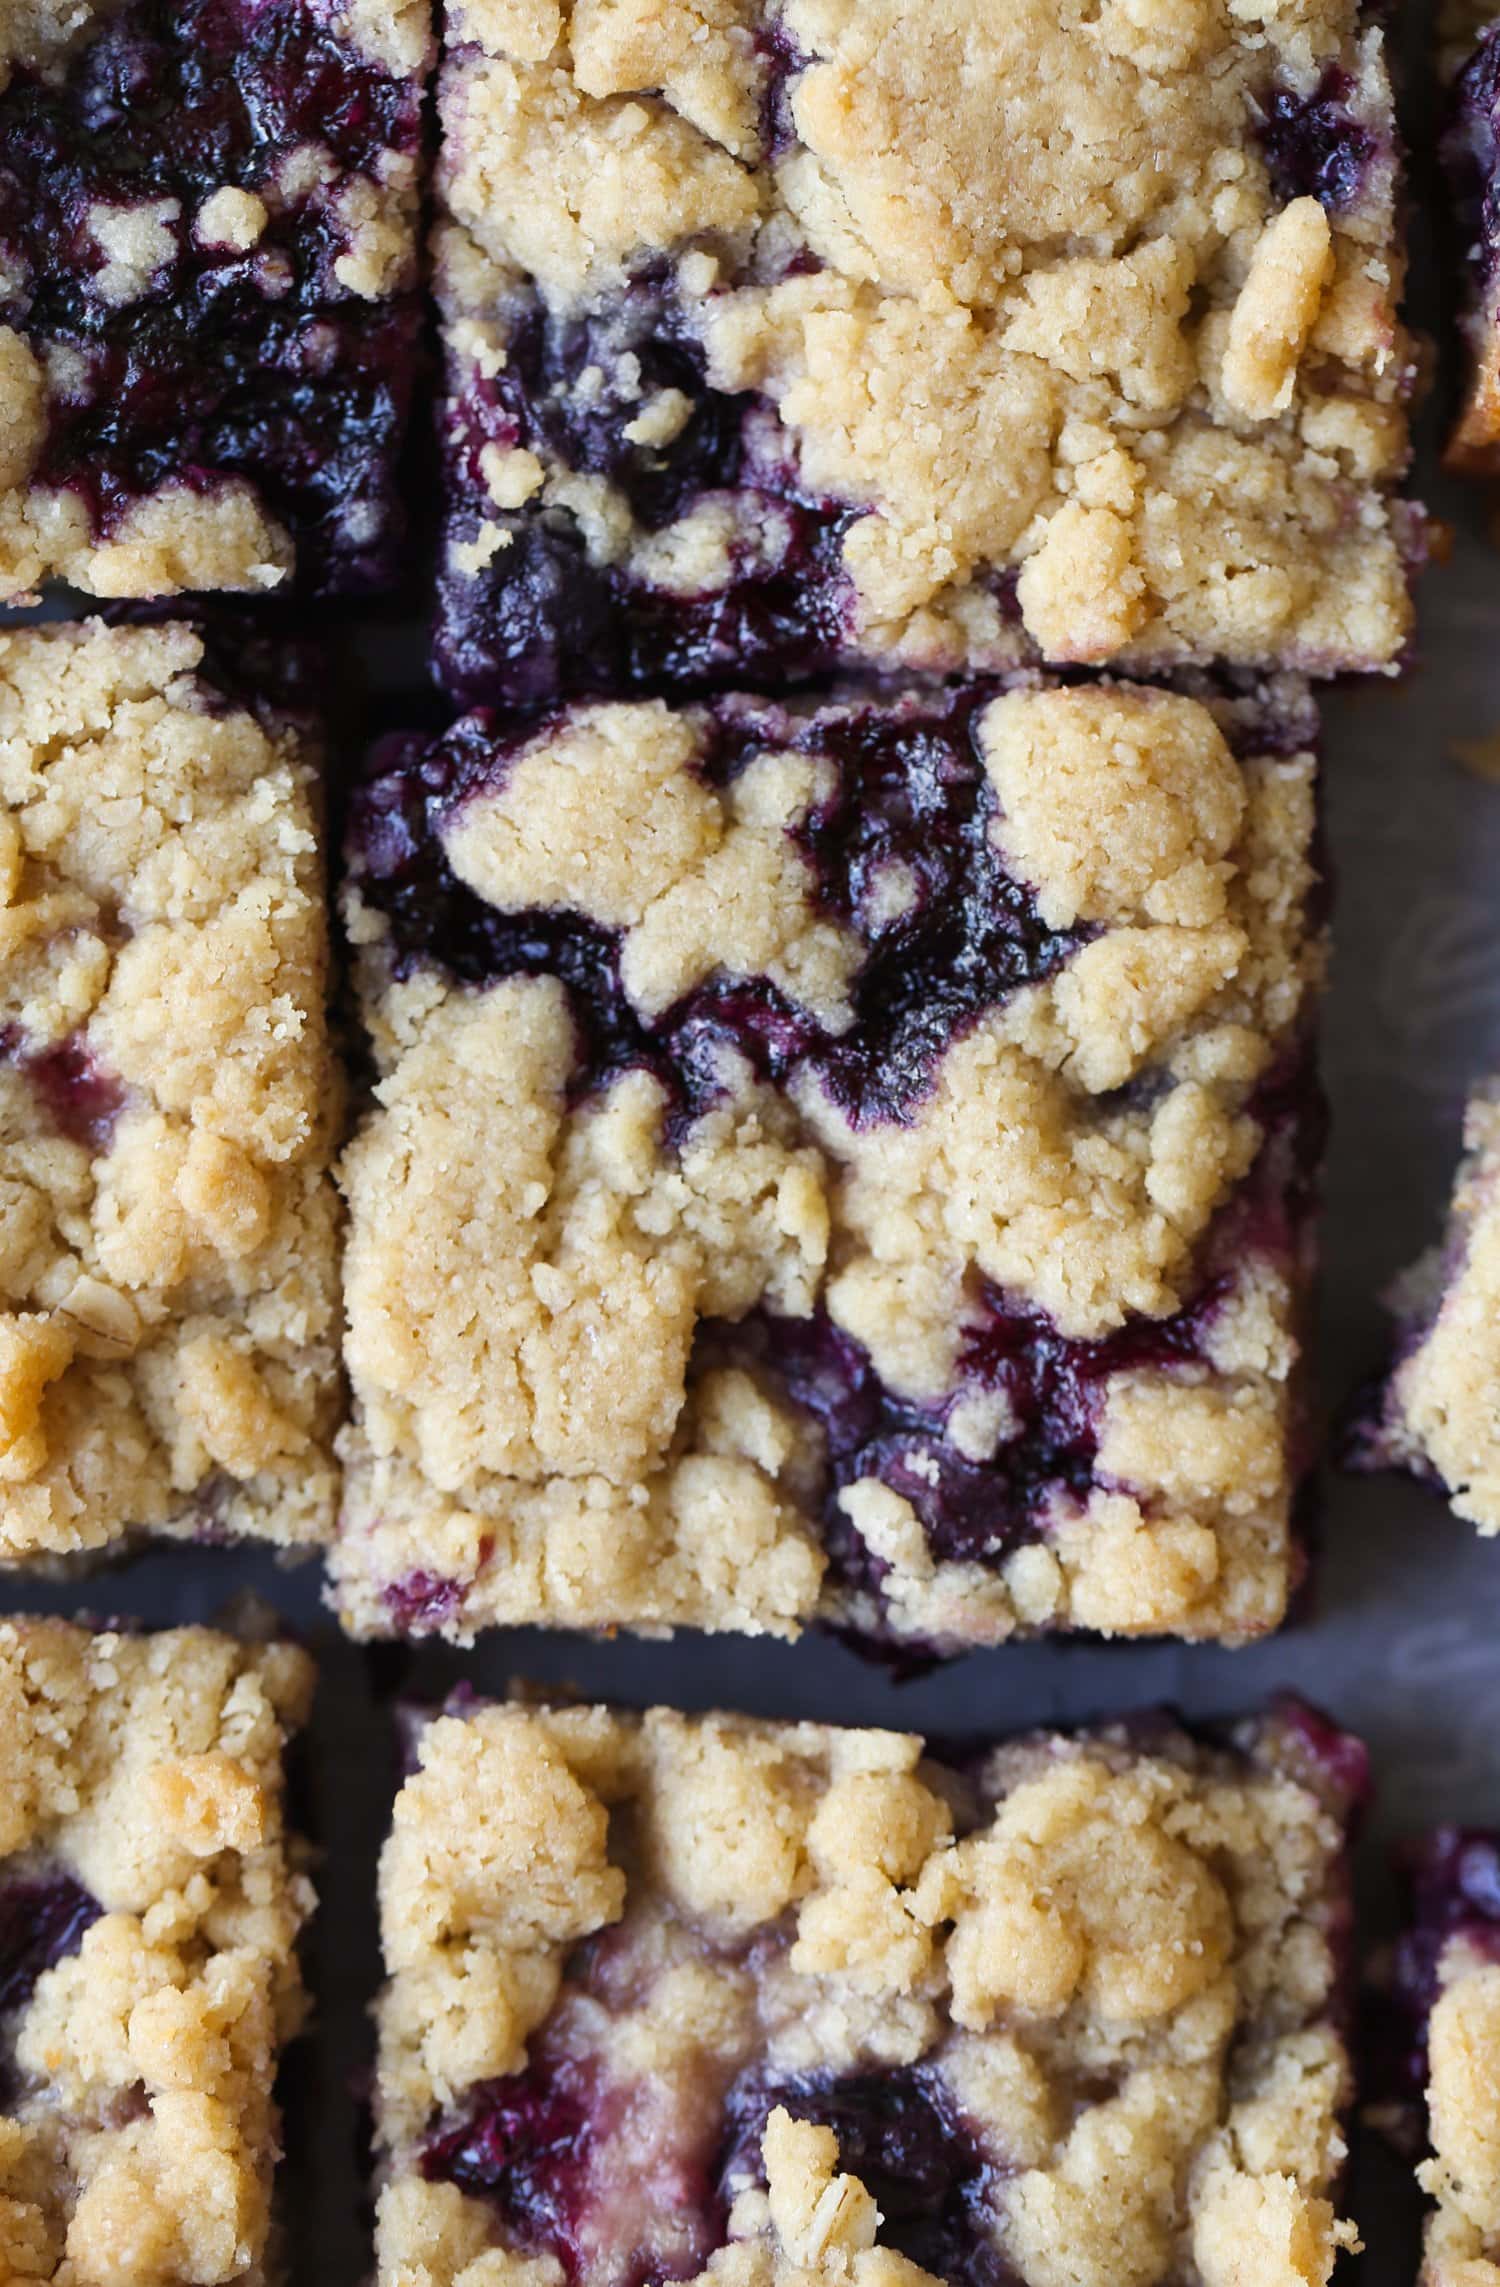 Crispy topping on blueberry bars close up